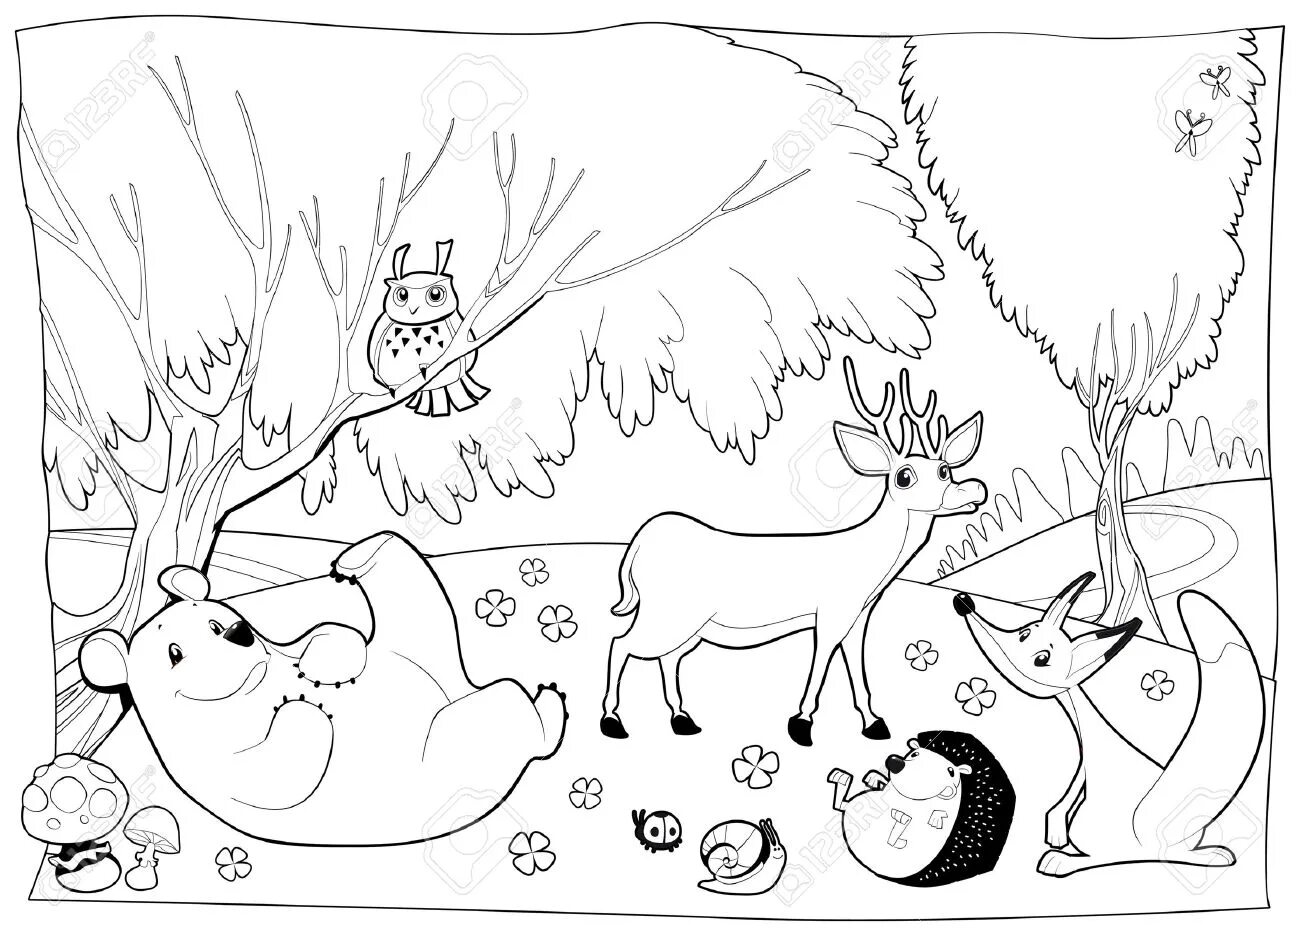 Coloring page charming holiday hut